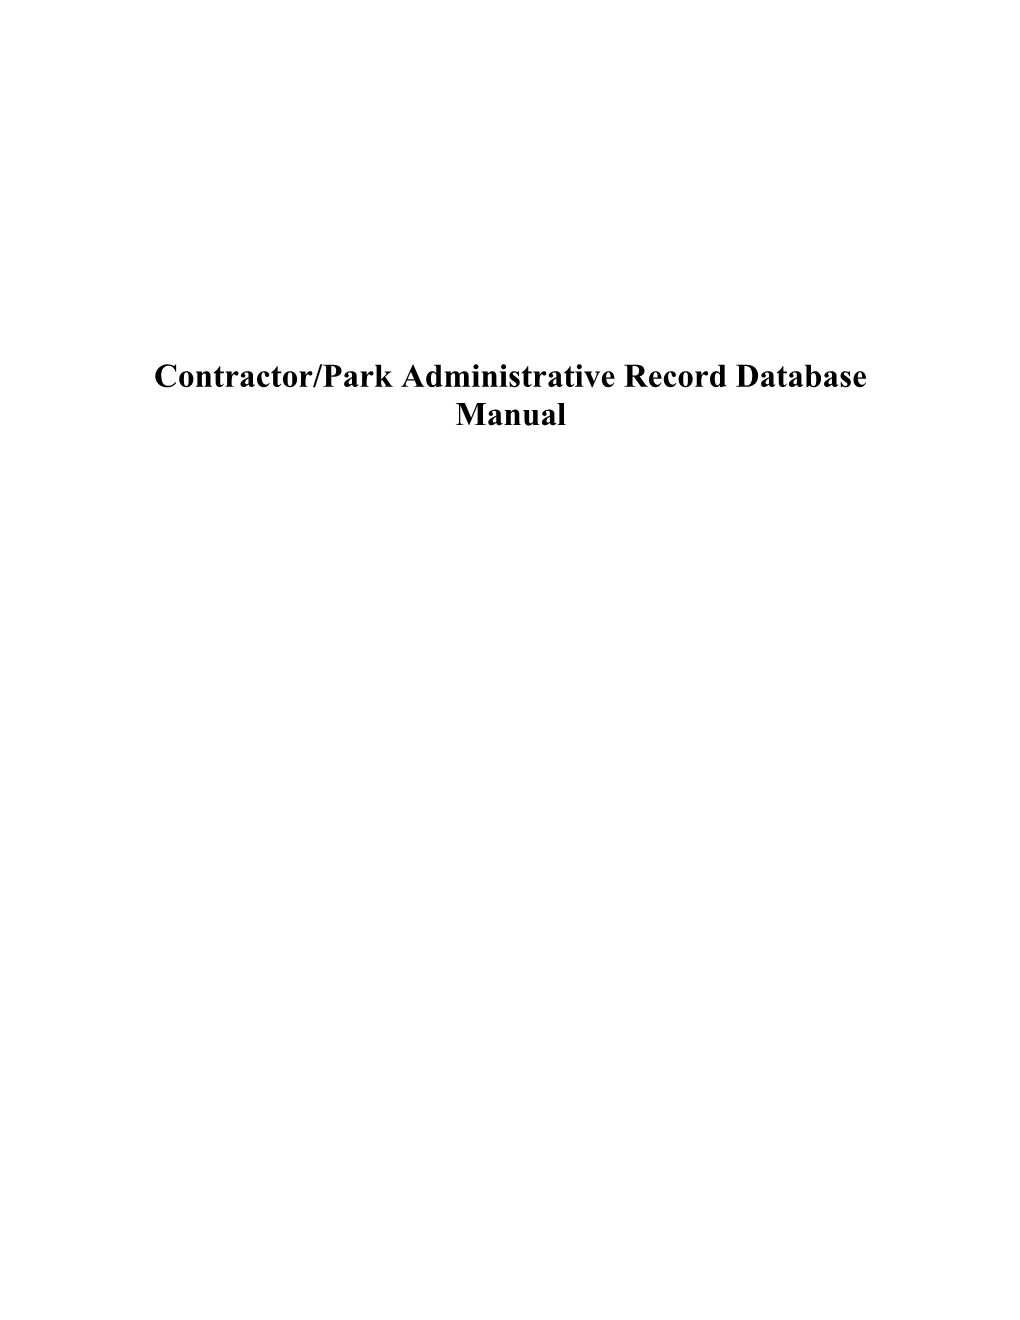 Contractor/Park Administrative Record Database Manual